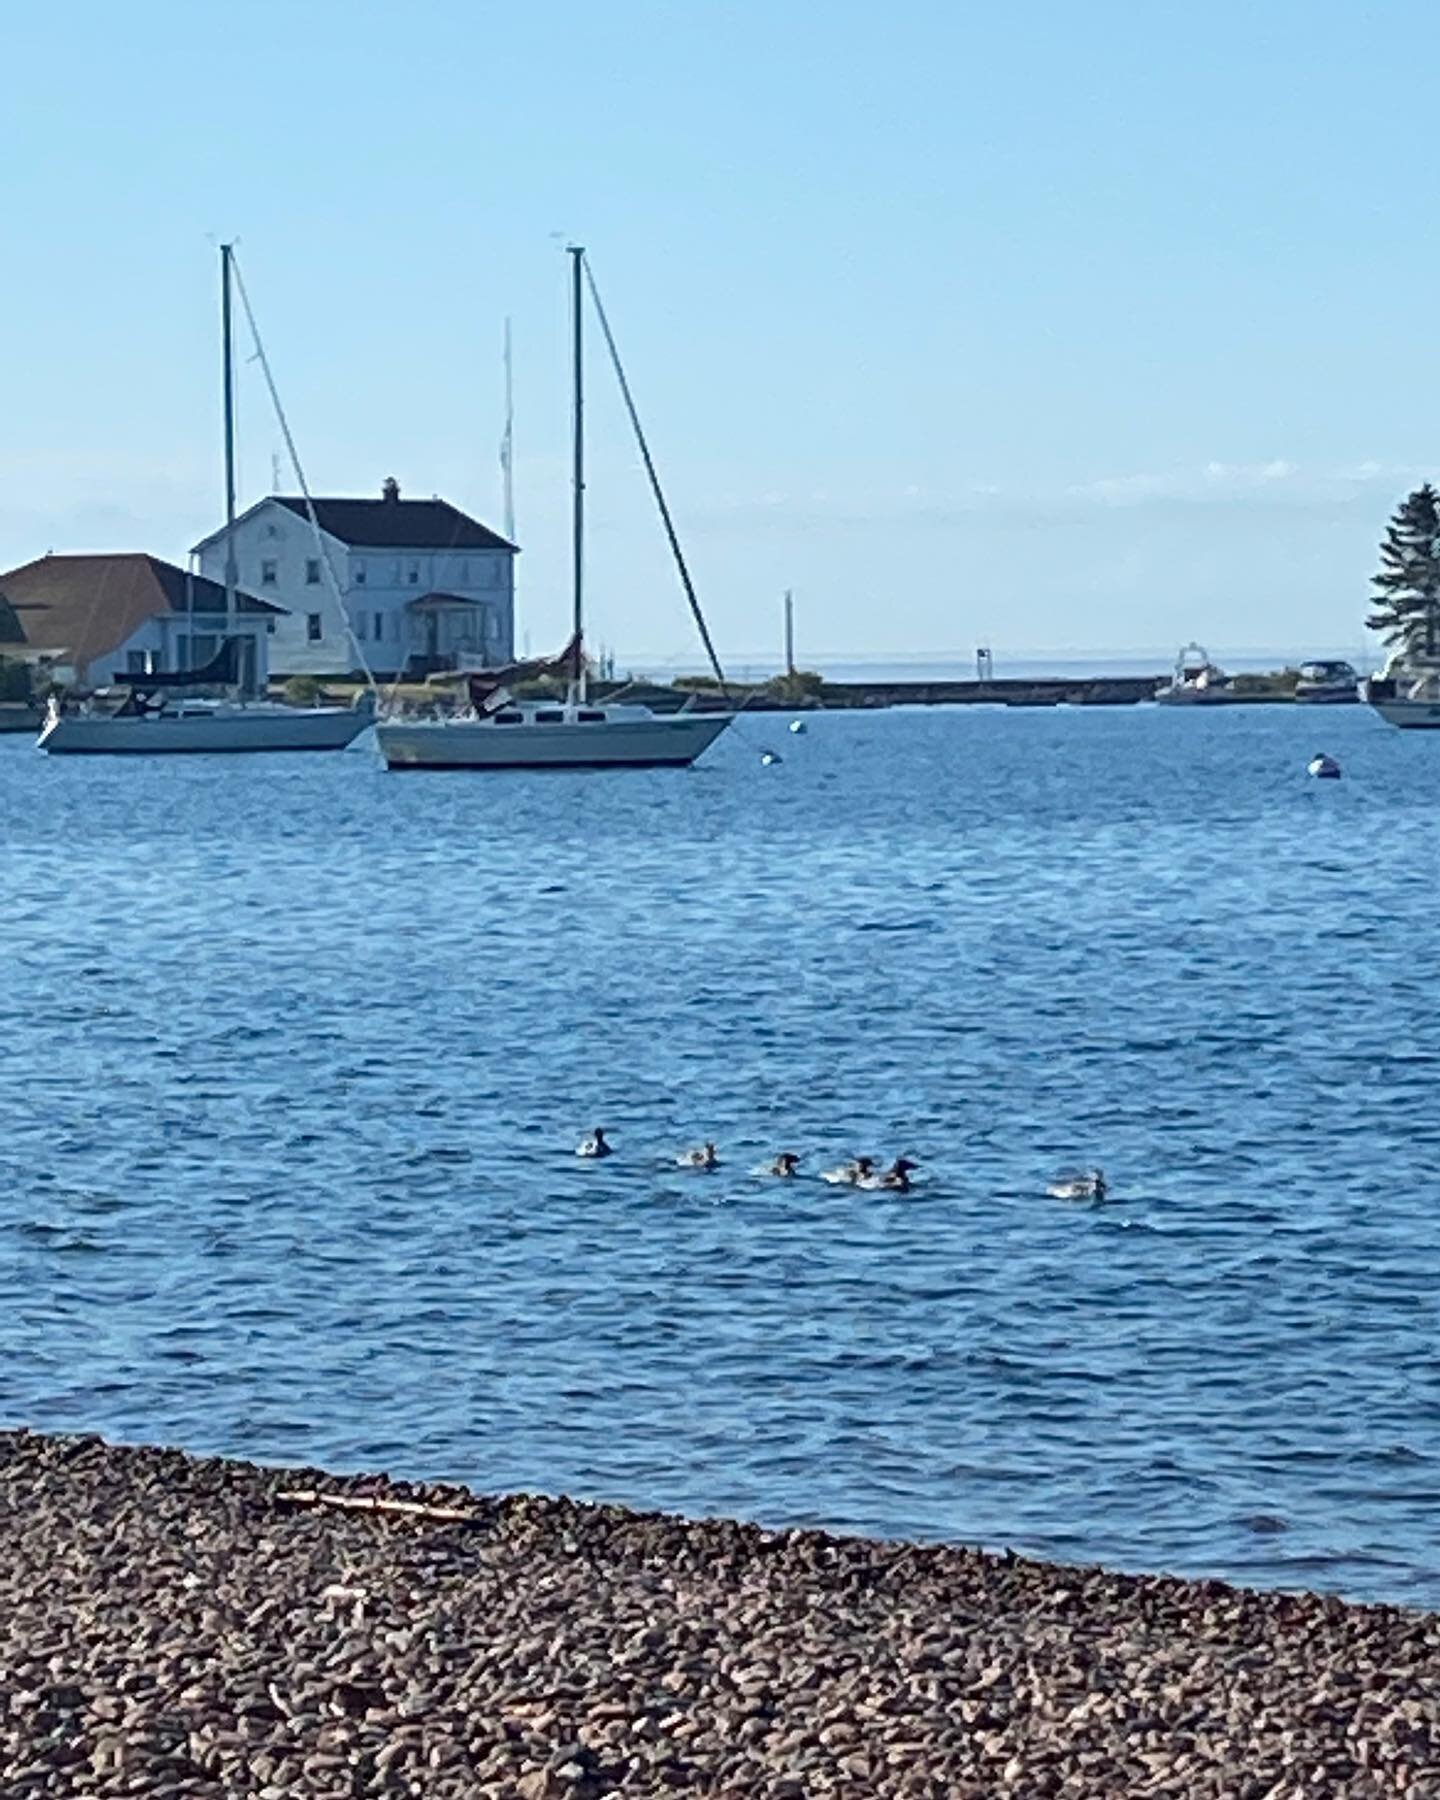 Harbor watch: life was abundant with many birds including this family of ducks. Was joined by two persons this morning.